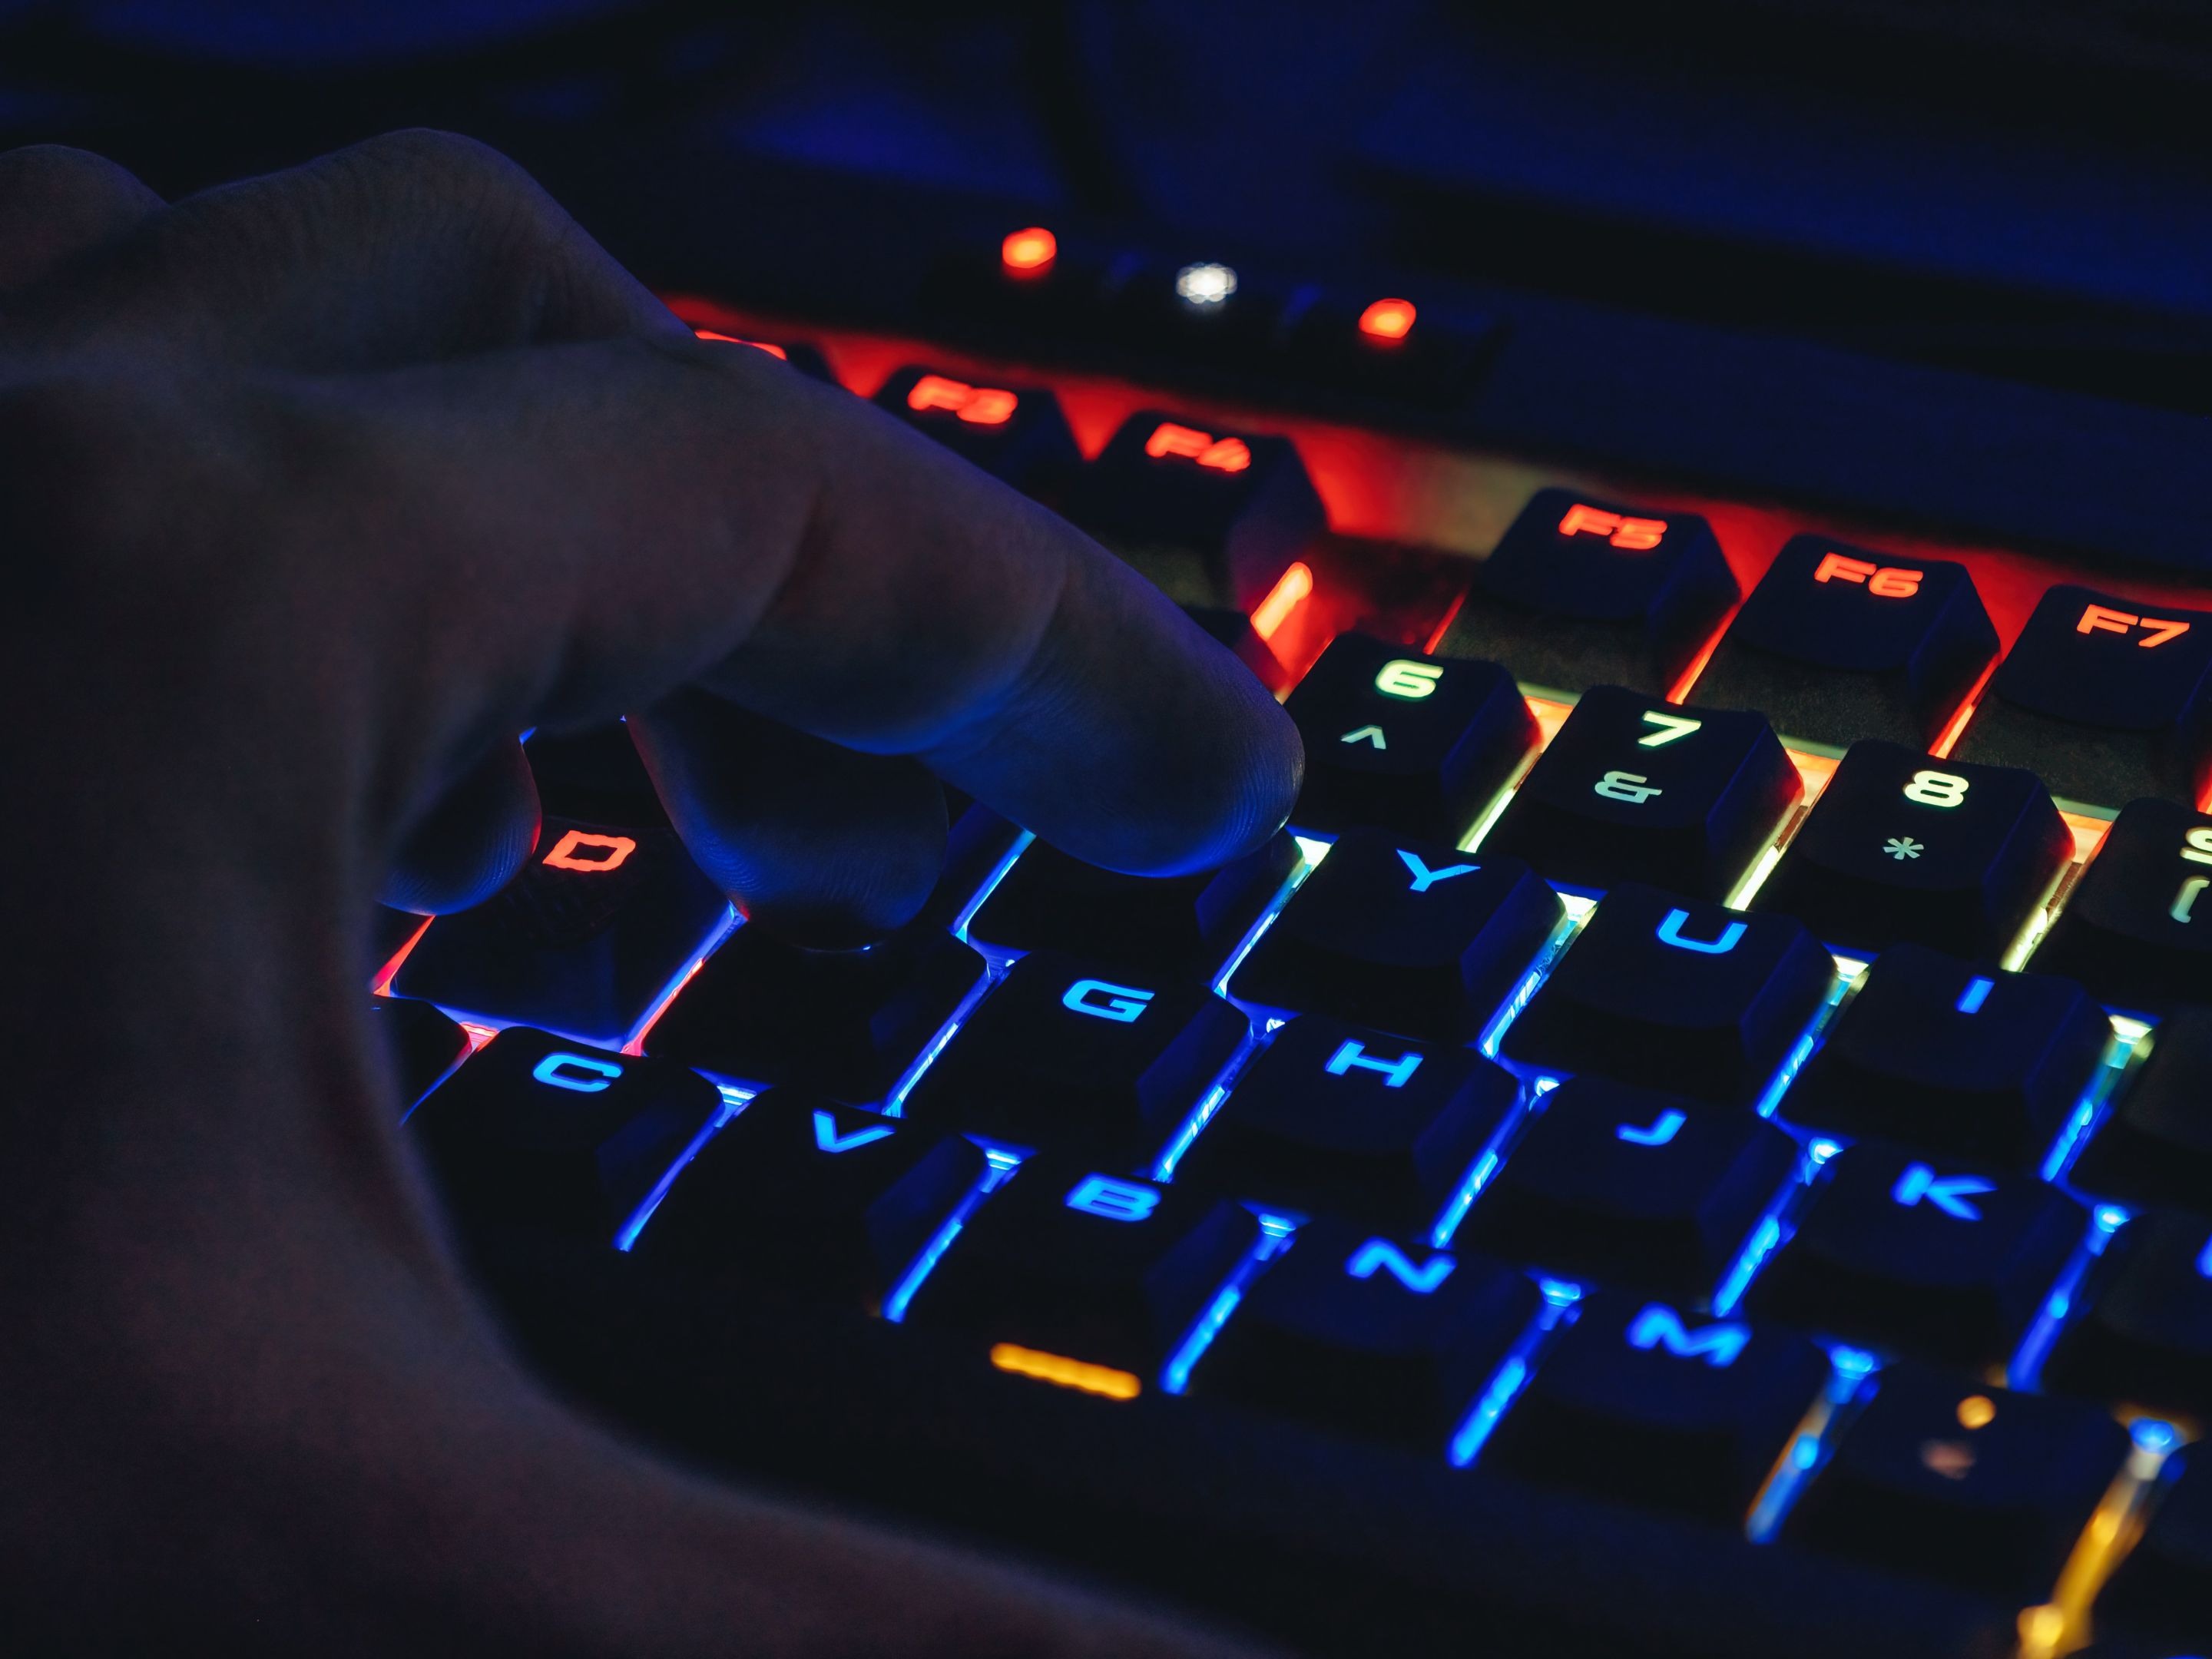 A neon-lit keyboard shine blue, orange and red. A man's hand is poised above it, ready to type. 